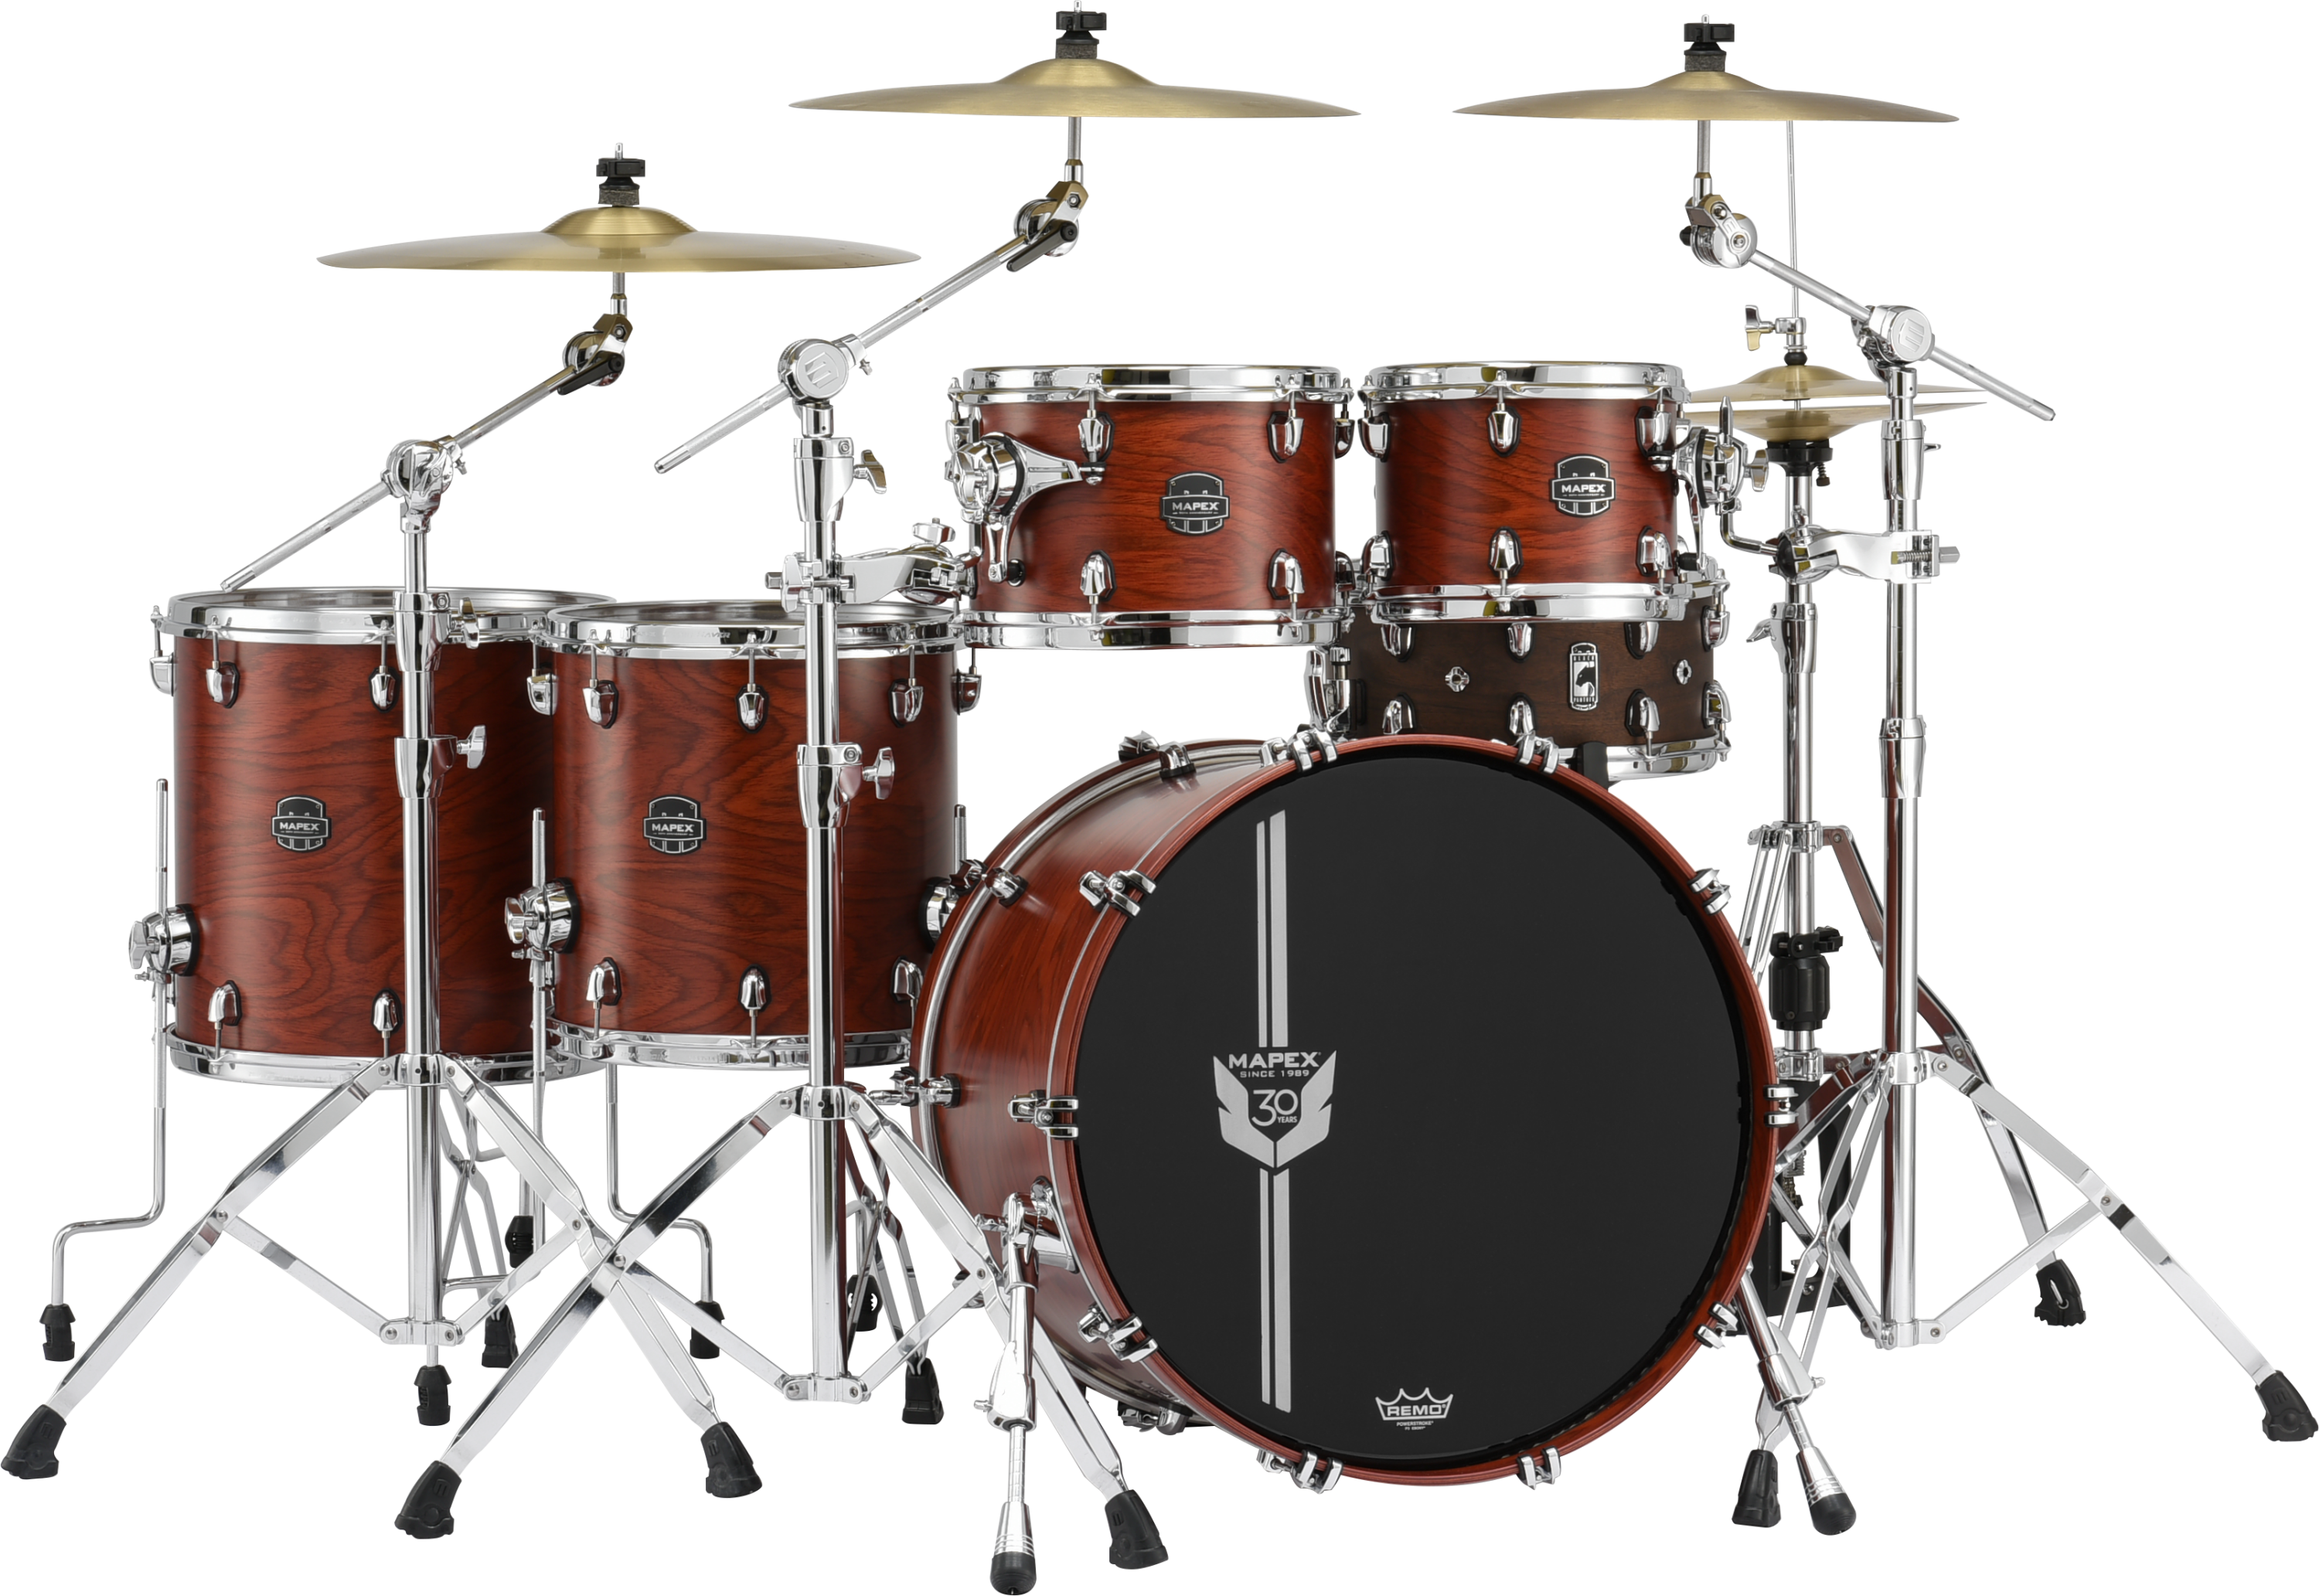 Mapex 30th Anniversary Limited Edition 5-piece Shell Pack - Garnet Flame